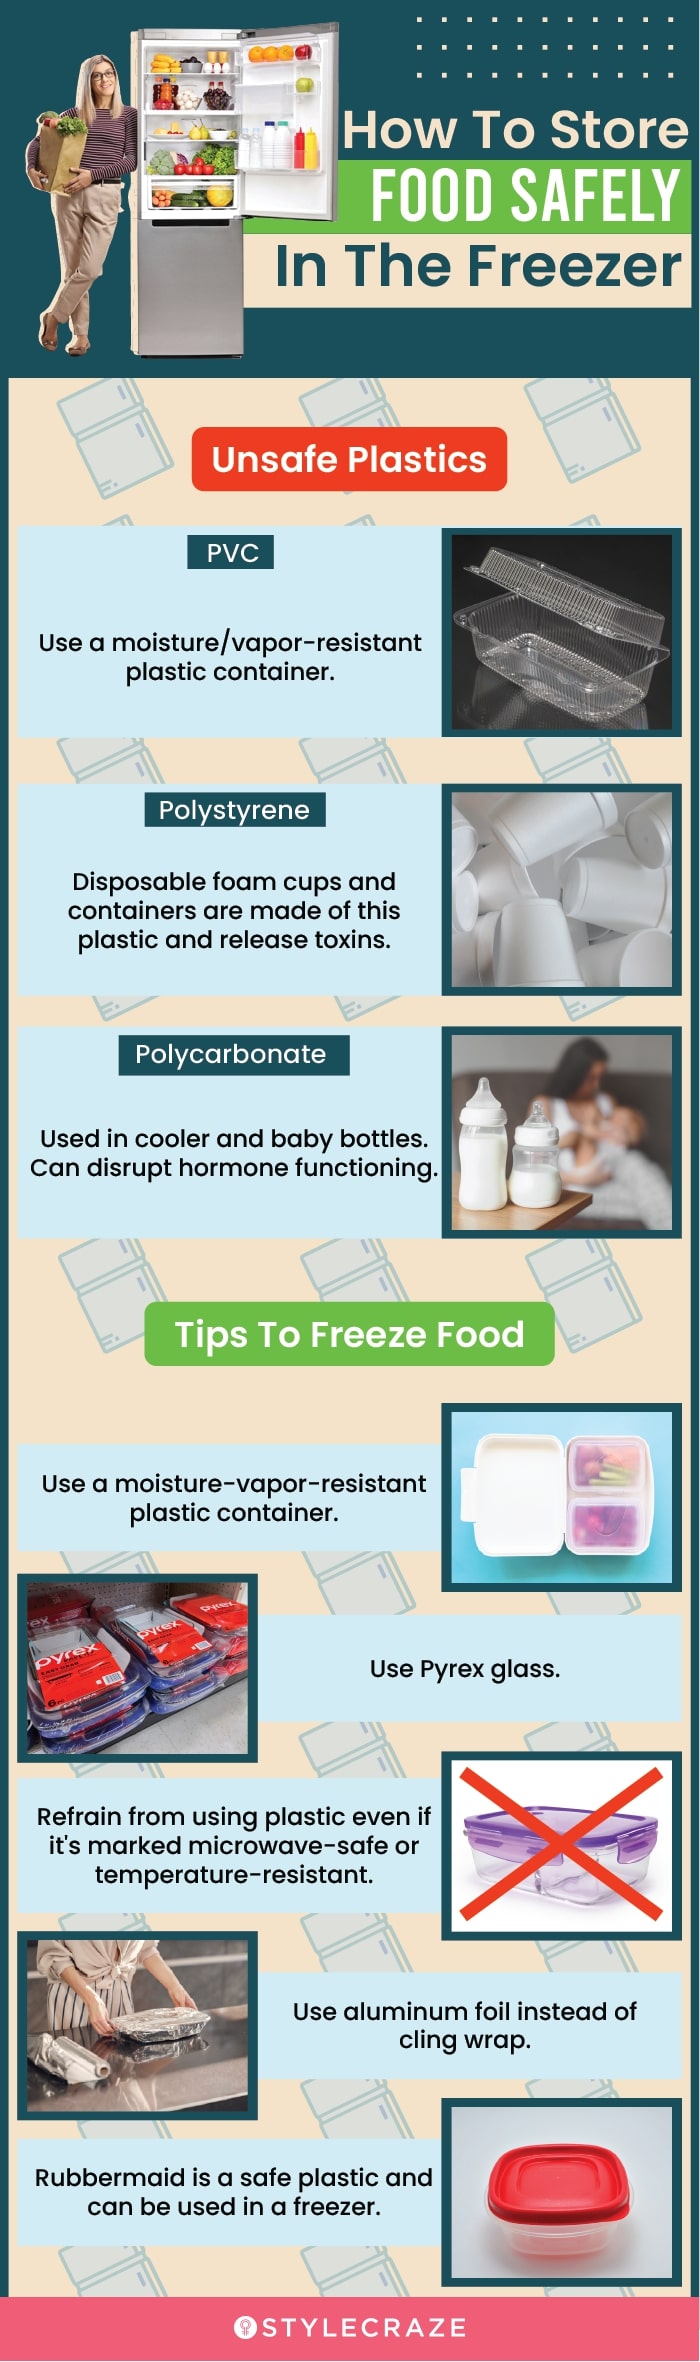 how to store food safety in the freezer(infographic)